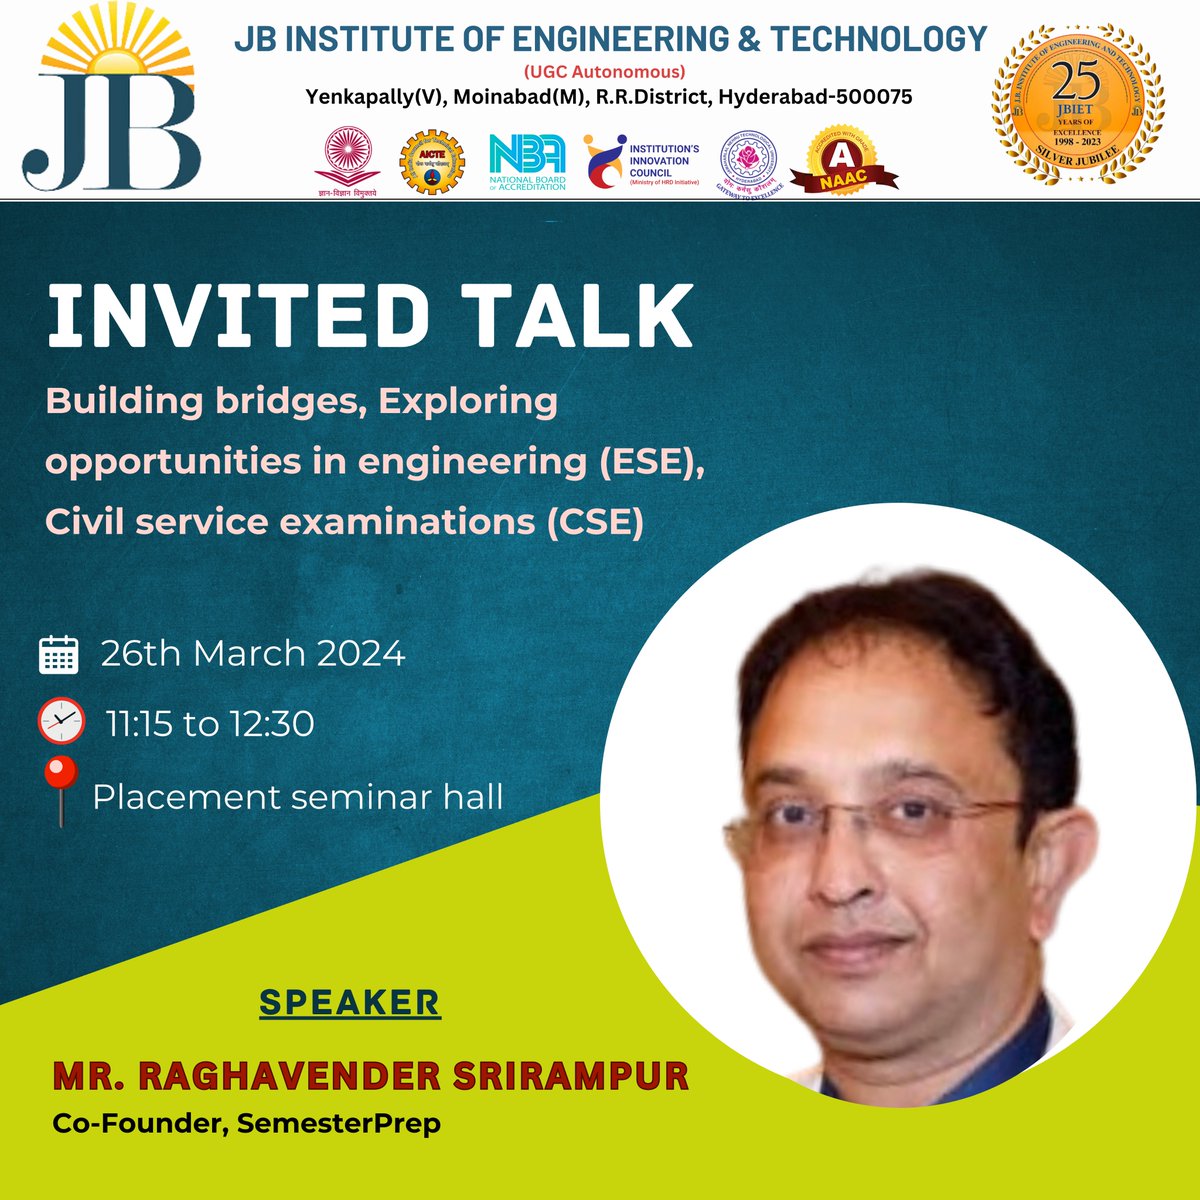 Invited Talk on “Building bridges, Exploring opportunities in engineering (ESE), 
Civil service examinations (CSE)” by Mr. Raghavender Srirampur(Co-Founder, SemesterPrep) on 26th March 2024 timing - 11:15 to 12:30 at Placement seminar hall.

#JBIET #JBIT #InvitedTalk